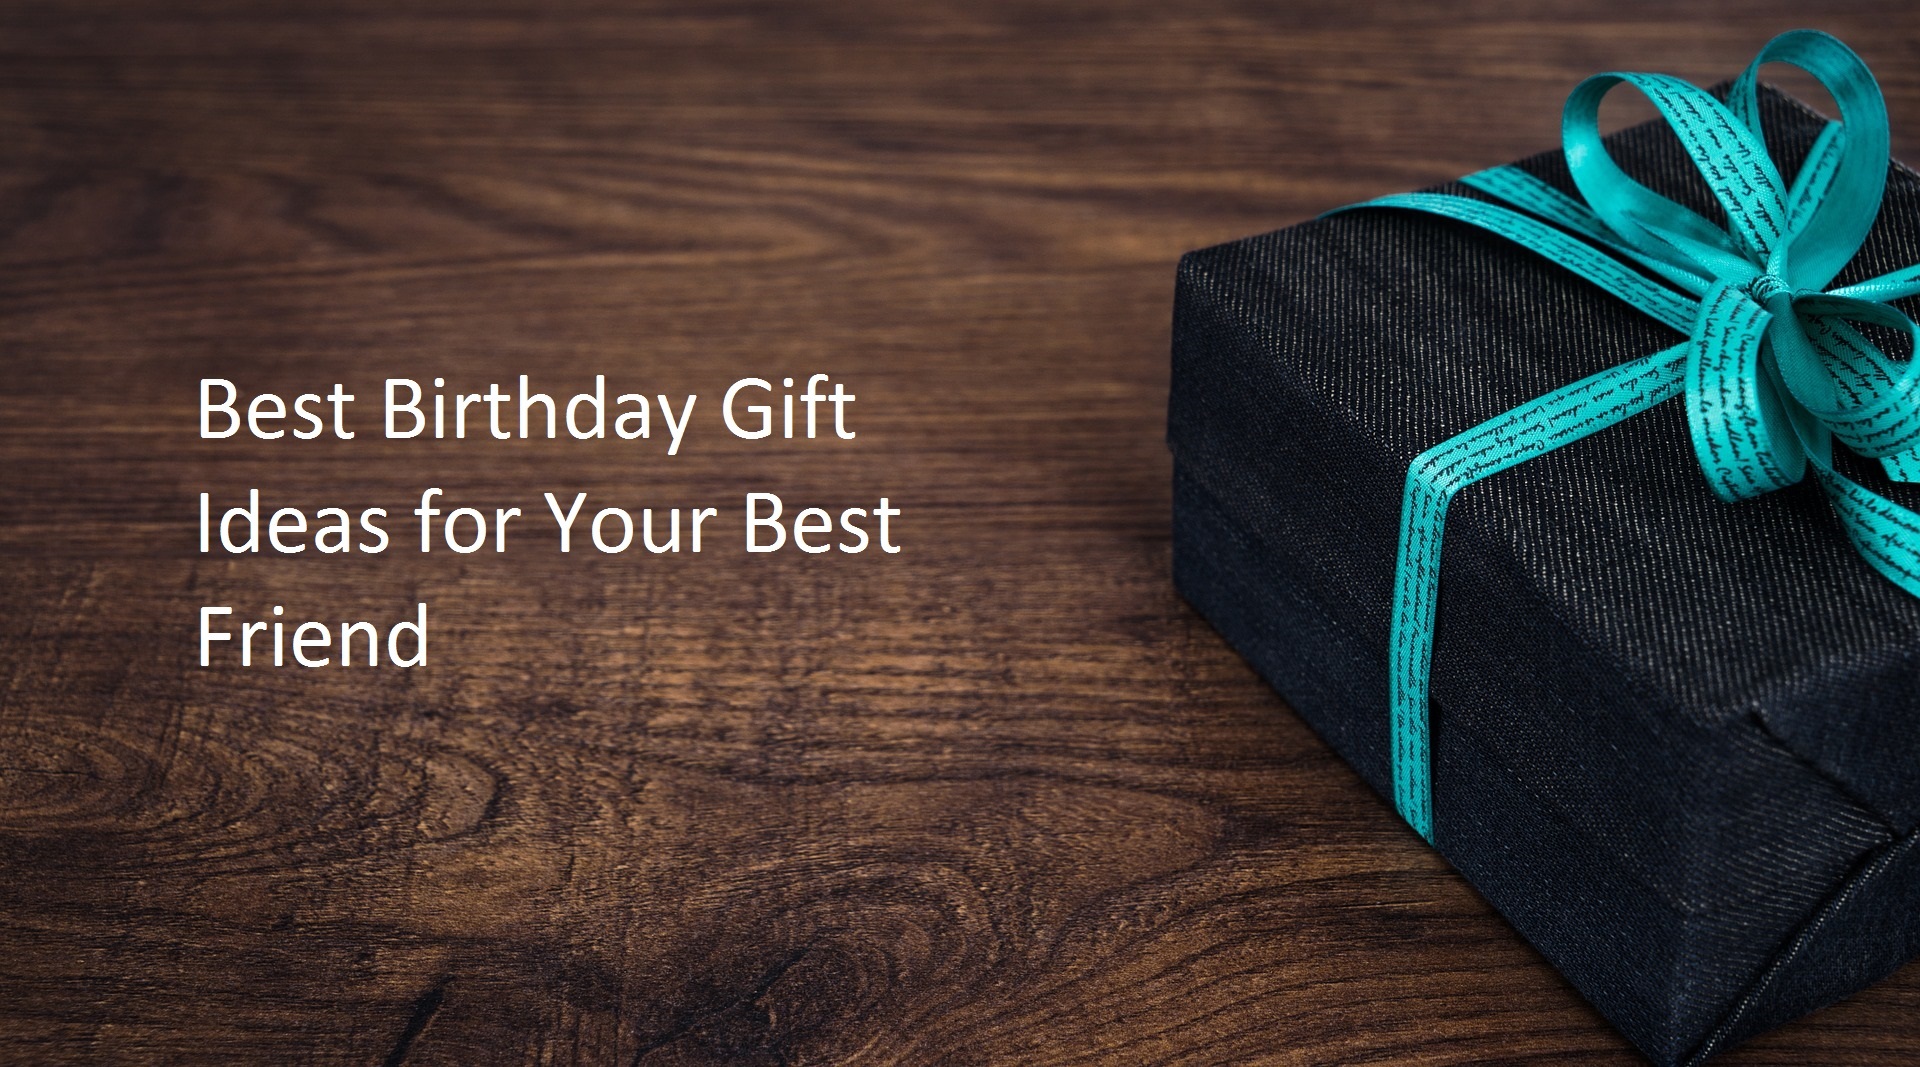 Birthday Gifts for Best Friend Girl | Gifts for Girls - IGP.com